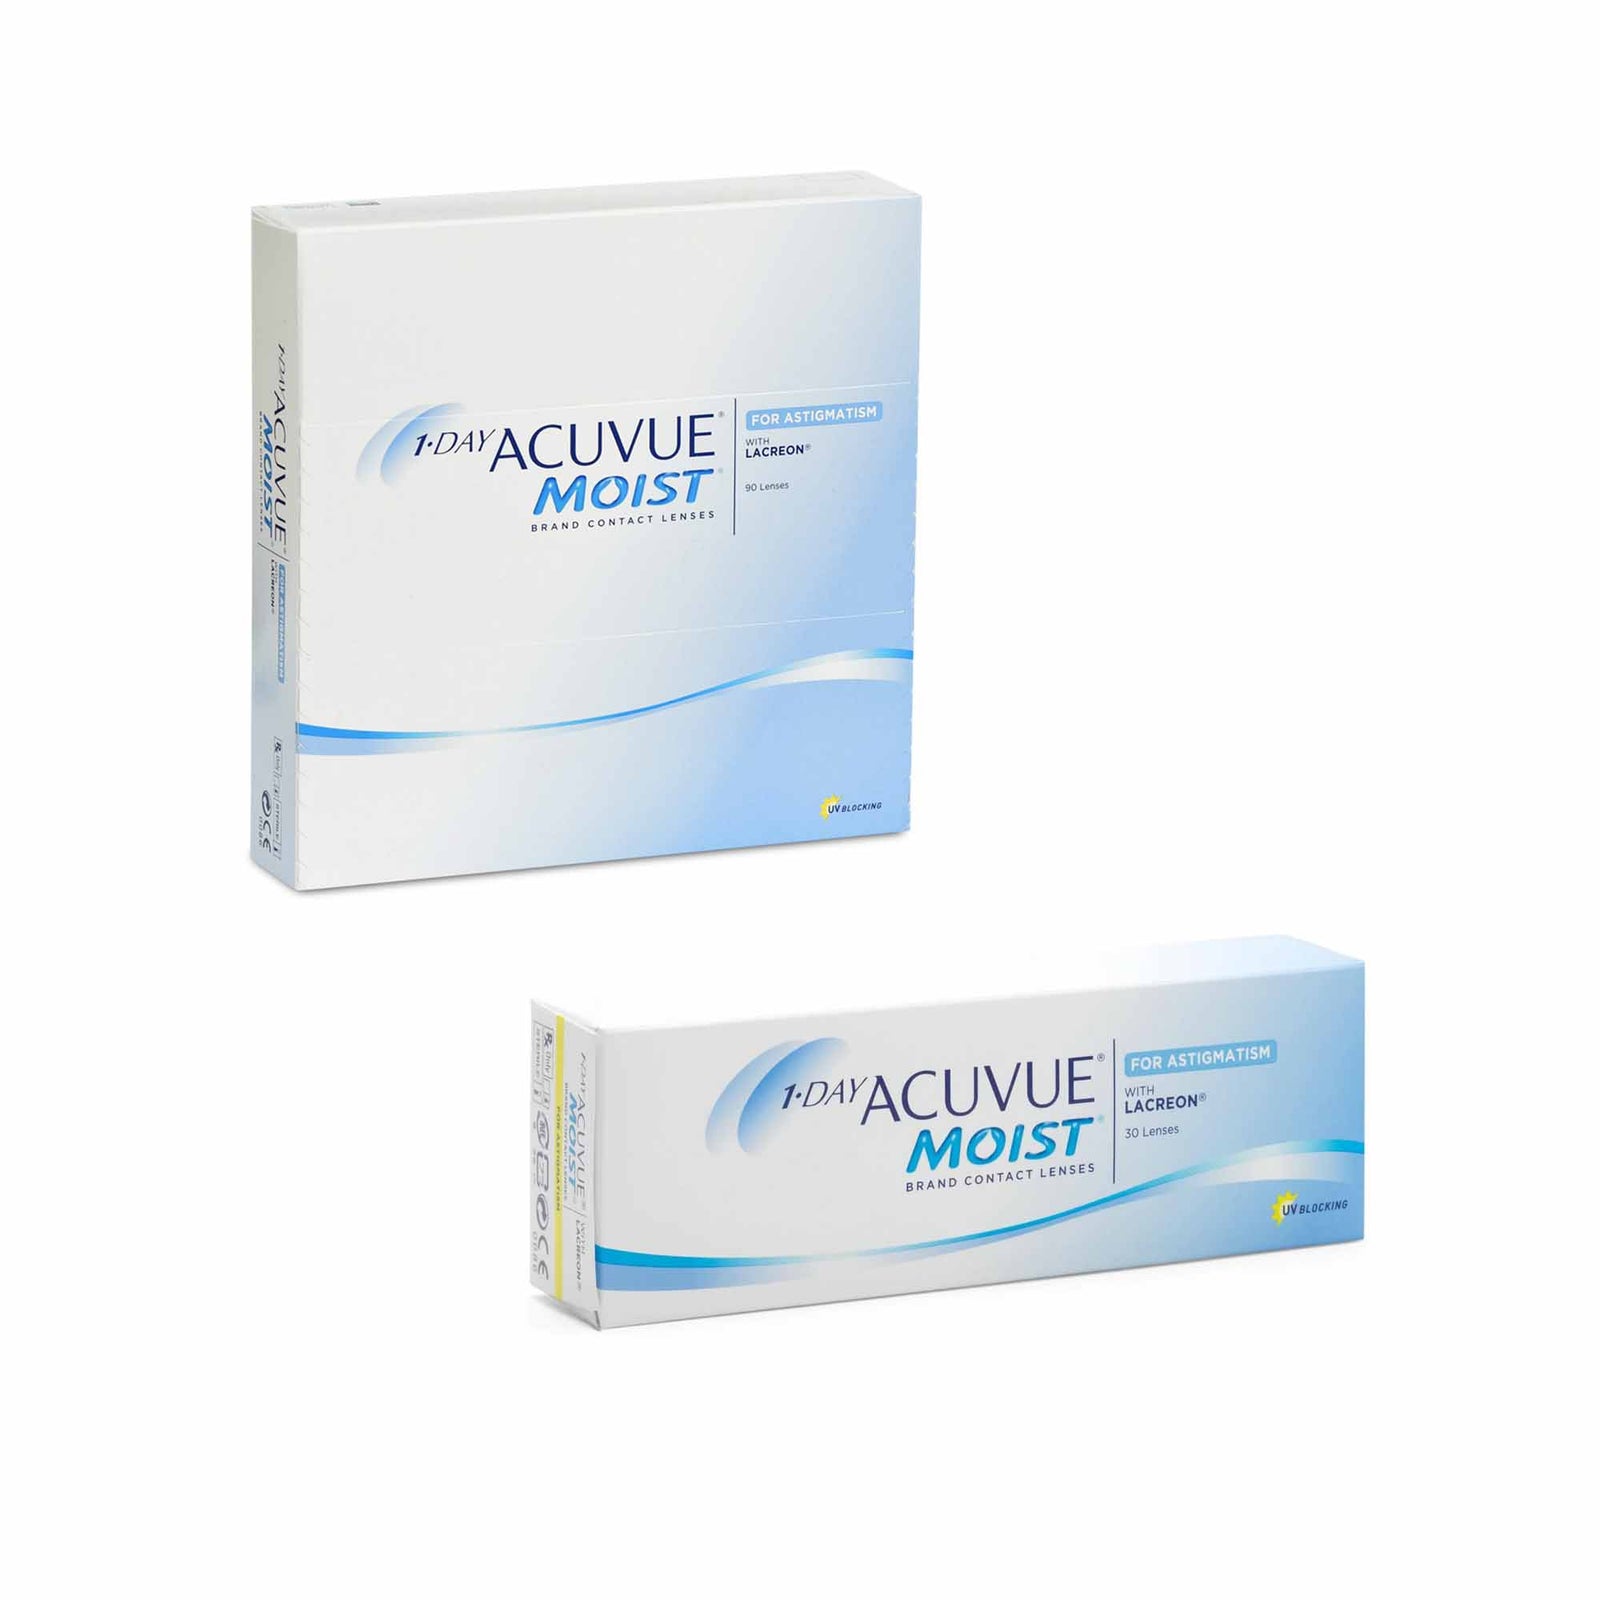 Acuvue : Acuvue 1 Day Moist Astigmatism - Daily - 4 Month Supply